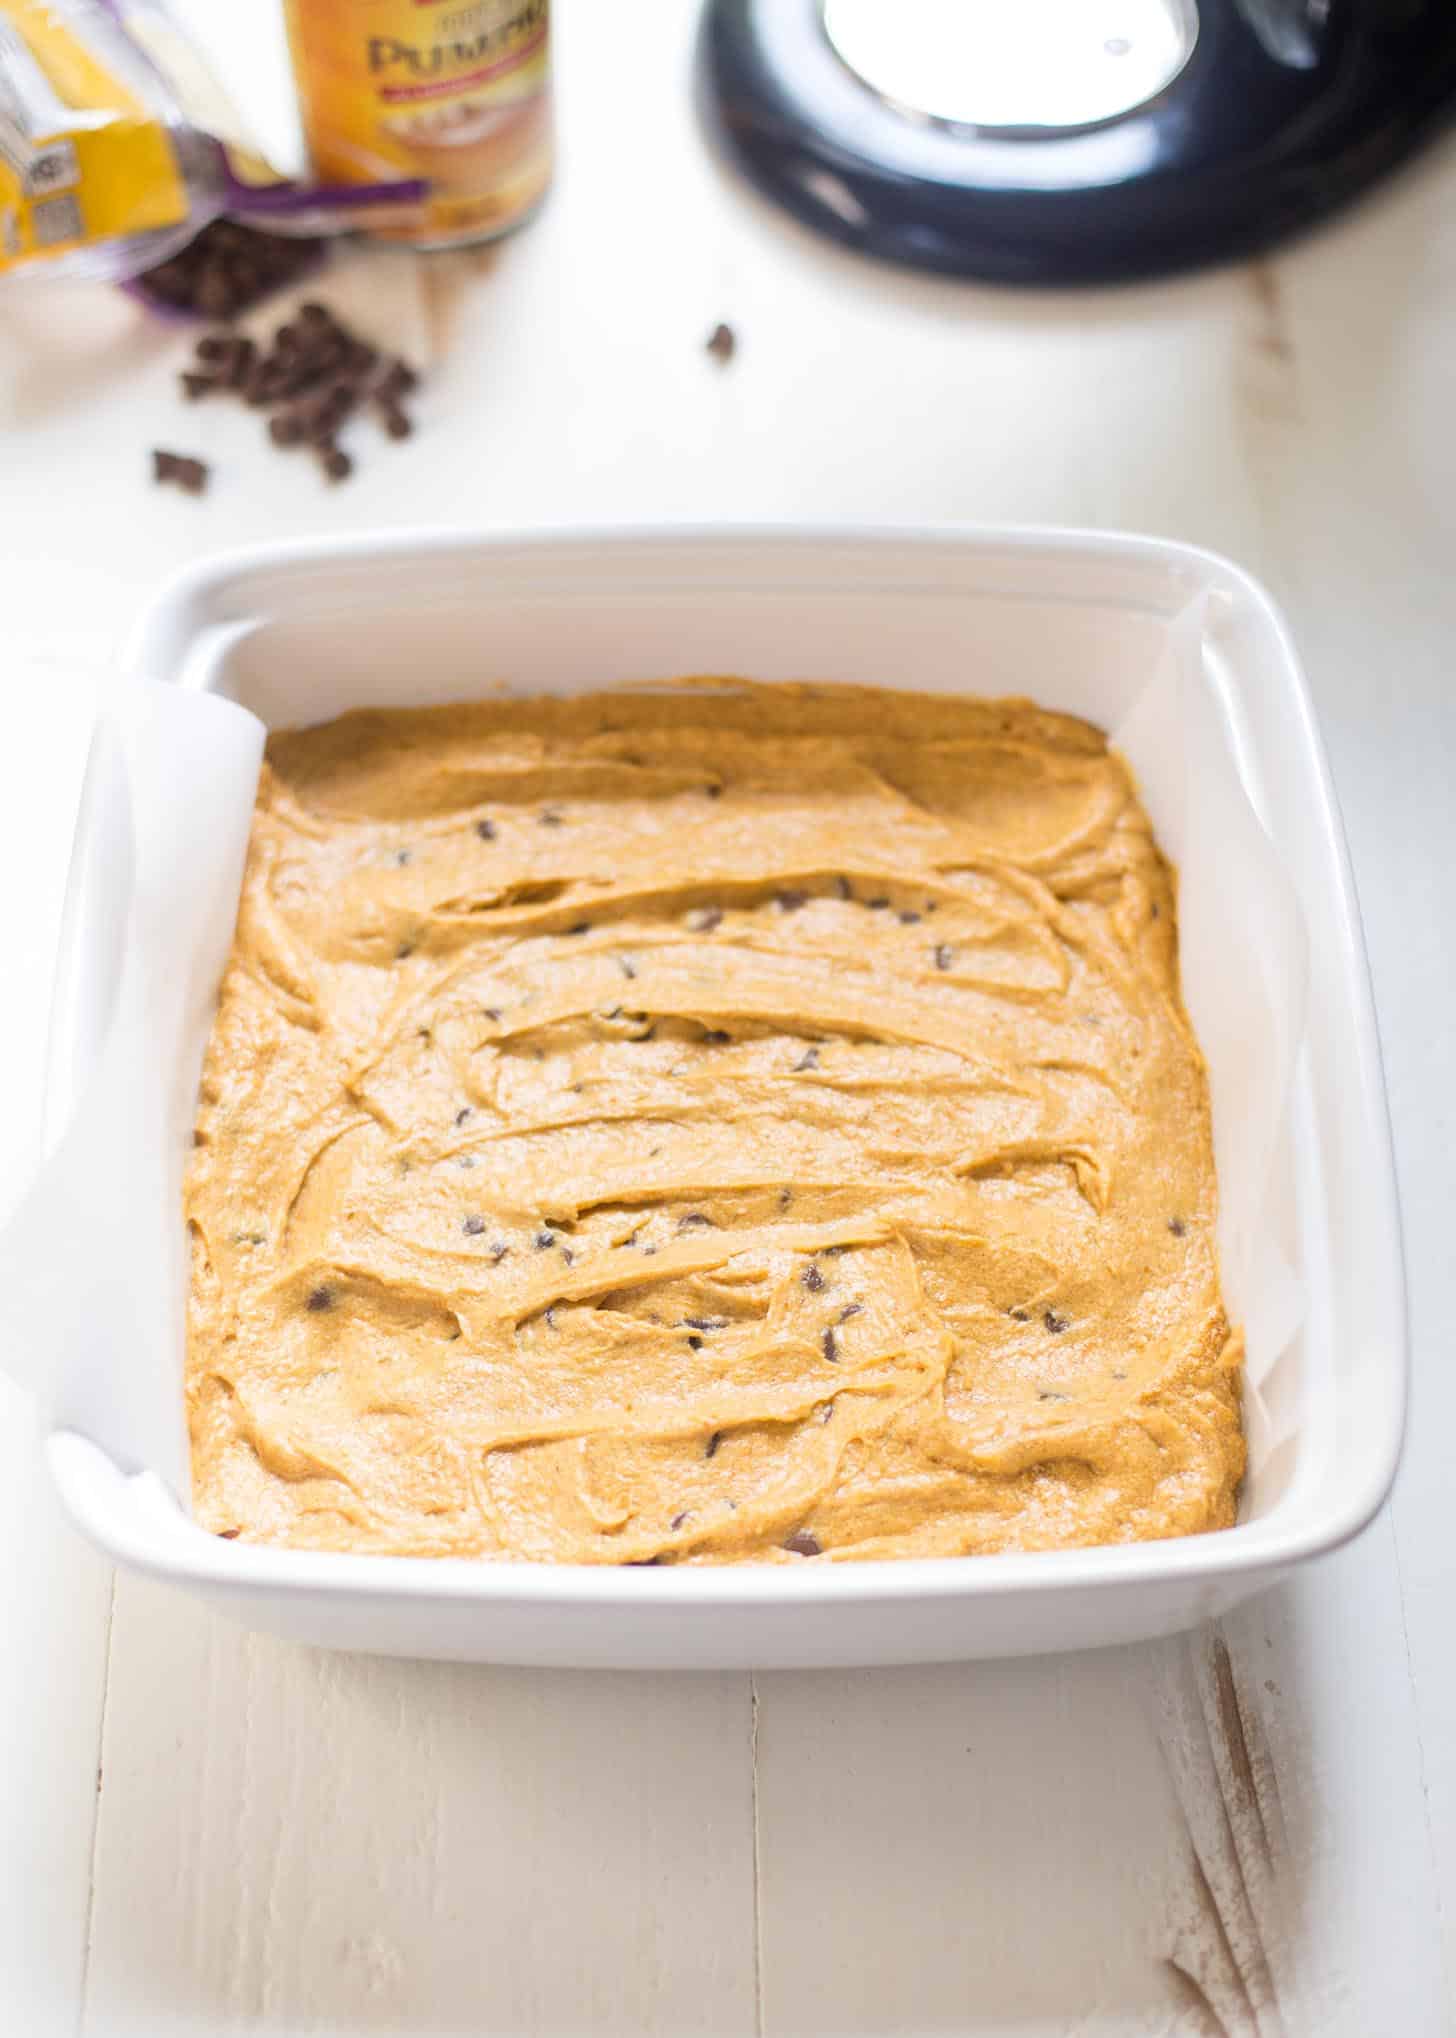 unbaked Pumpkin Chocolate Chip Snack Cake in a white baking dish